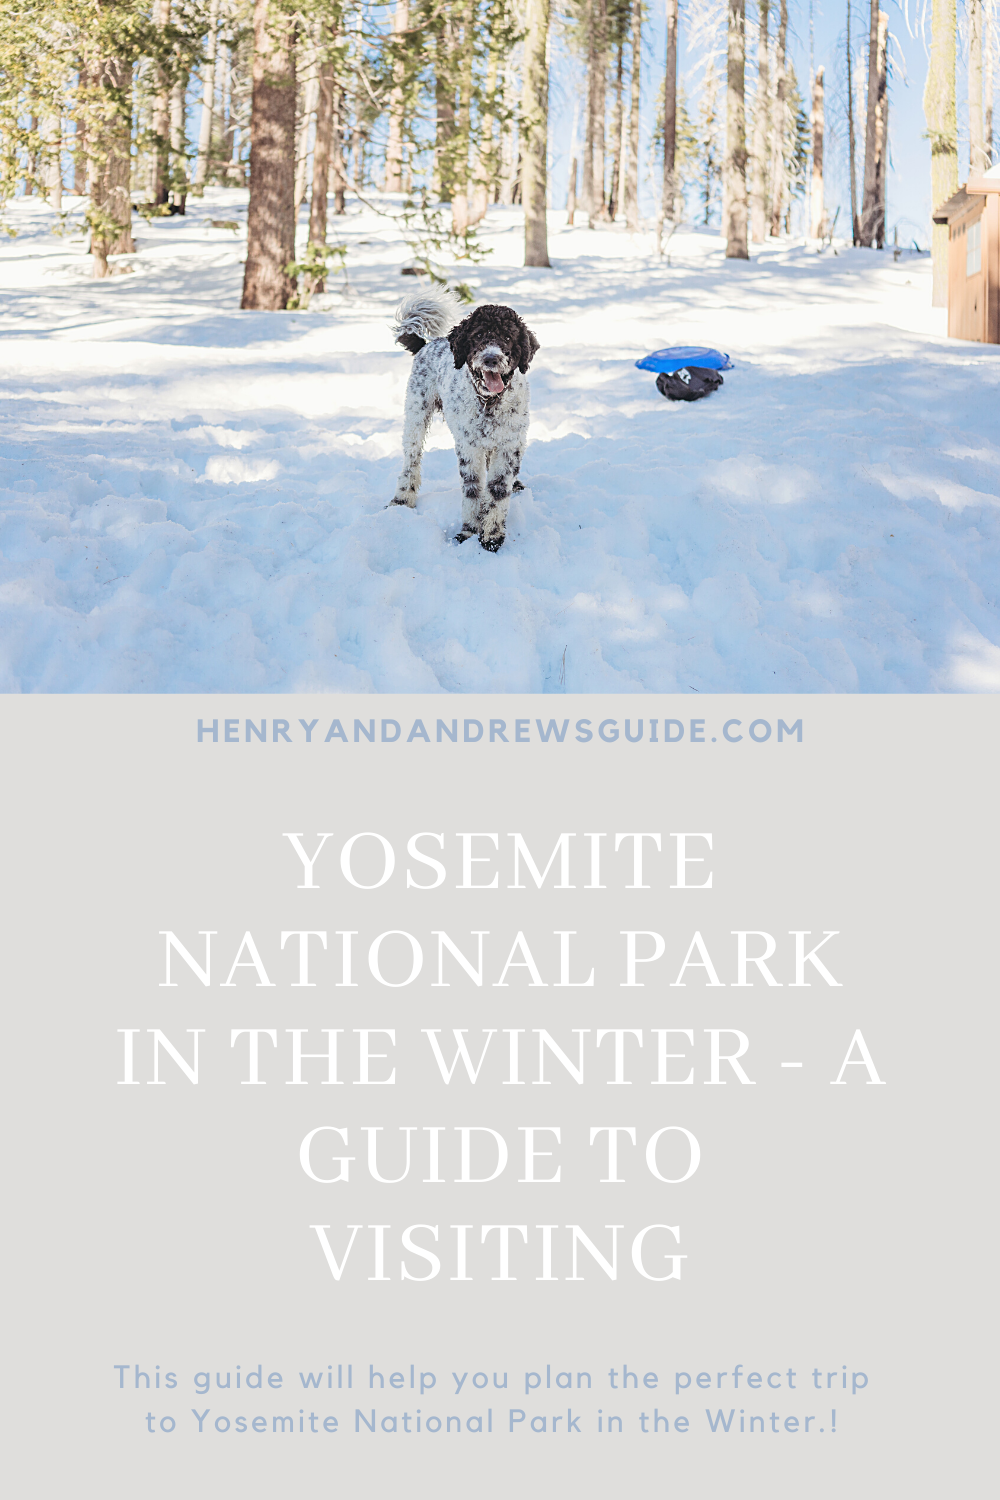 Yosemite National Park in the Winter - A Guide to Visiting 